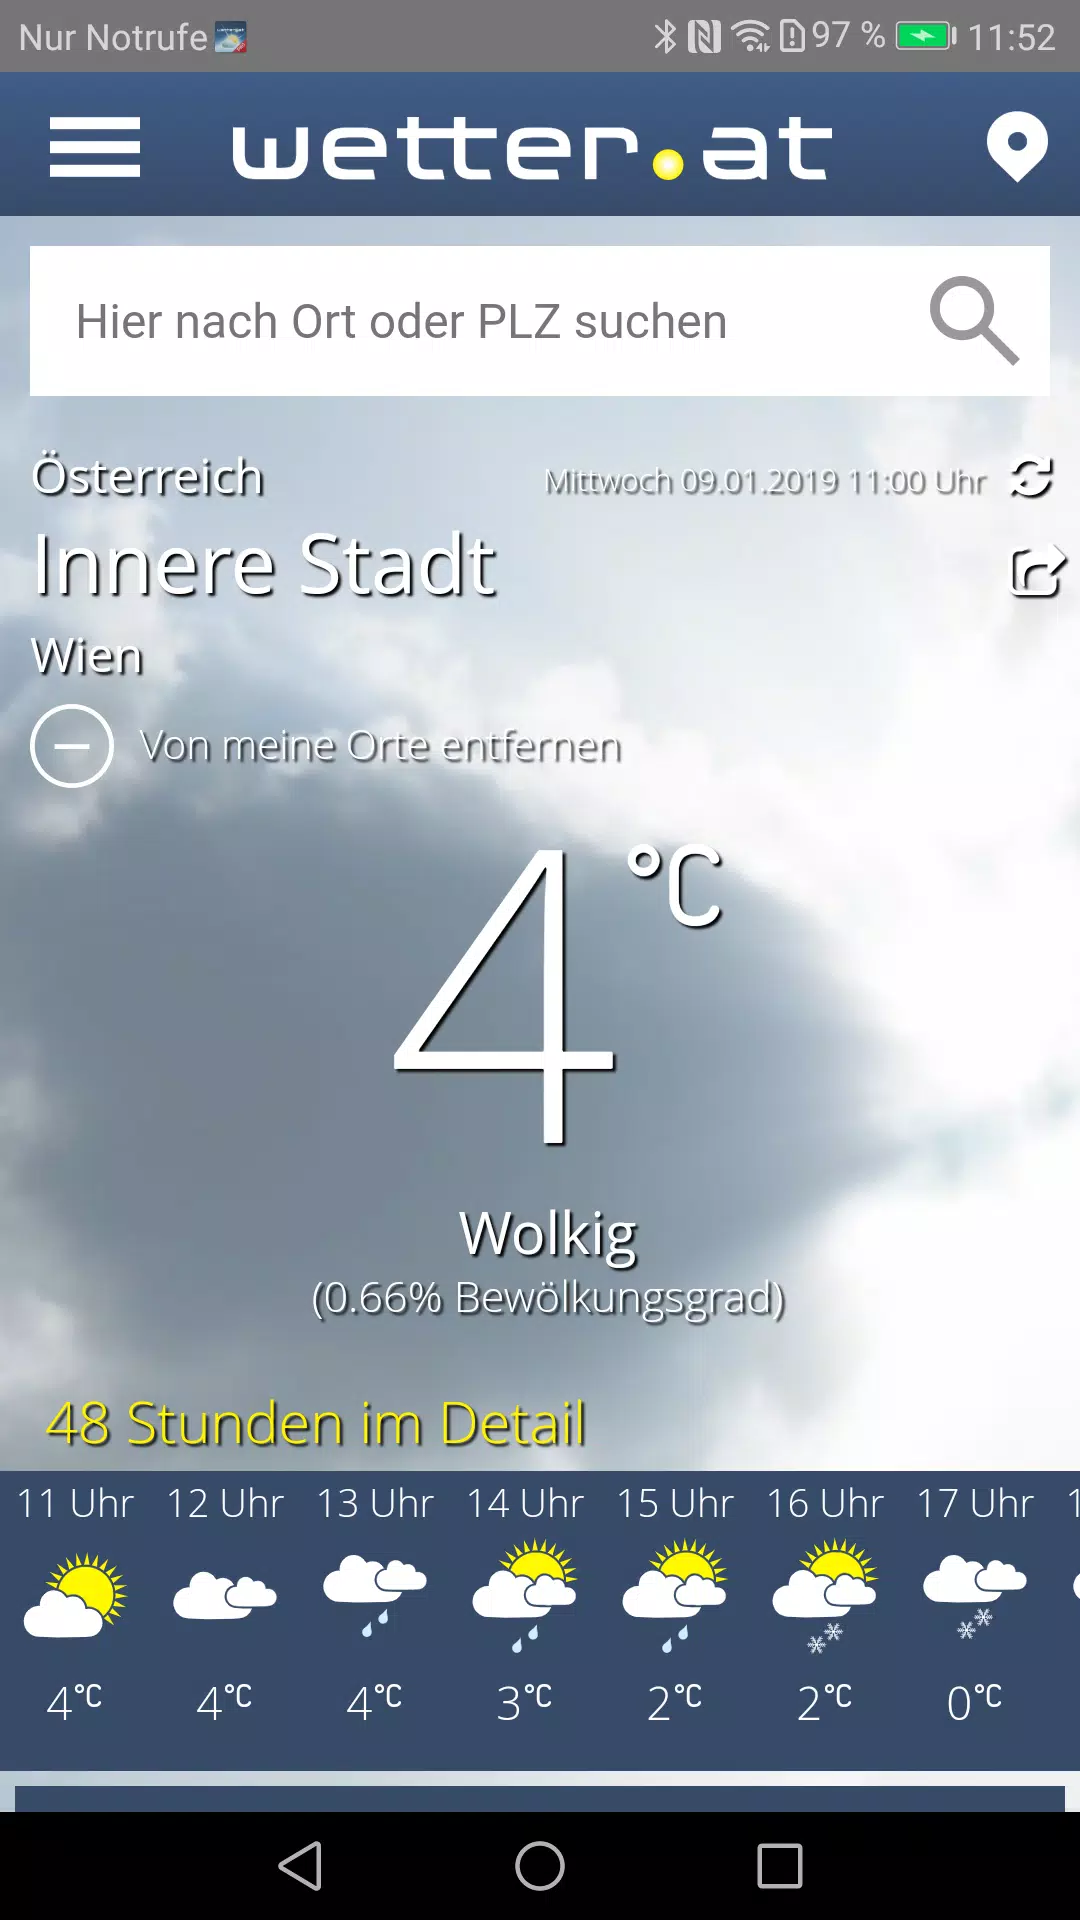 wetter.at for Android - APK Download